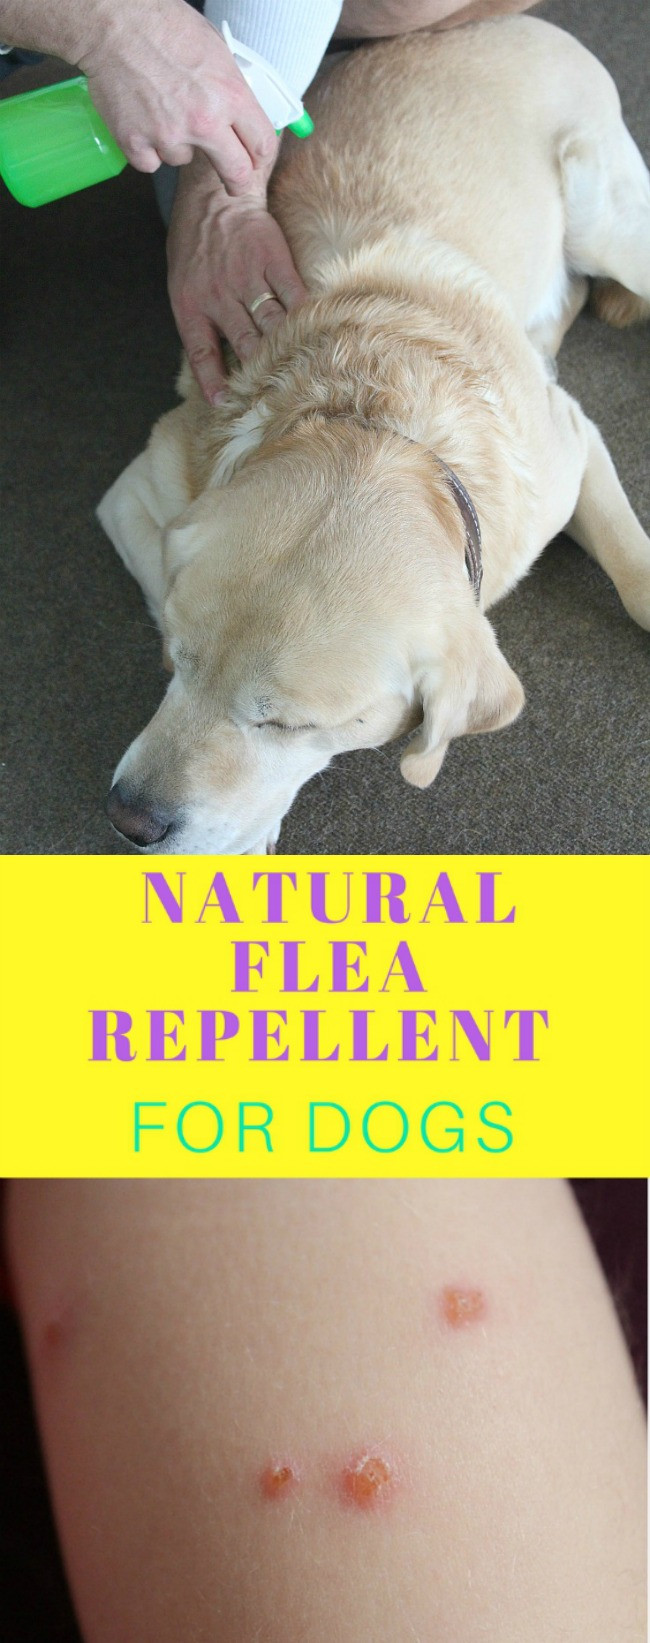 DIY Flea Treatment For Dogs
 How to rid of fleas on dogs